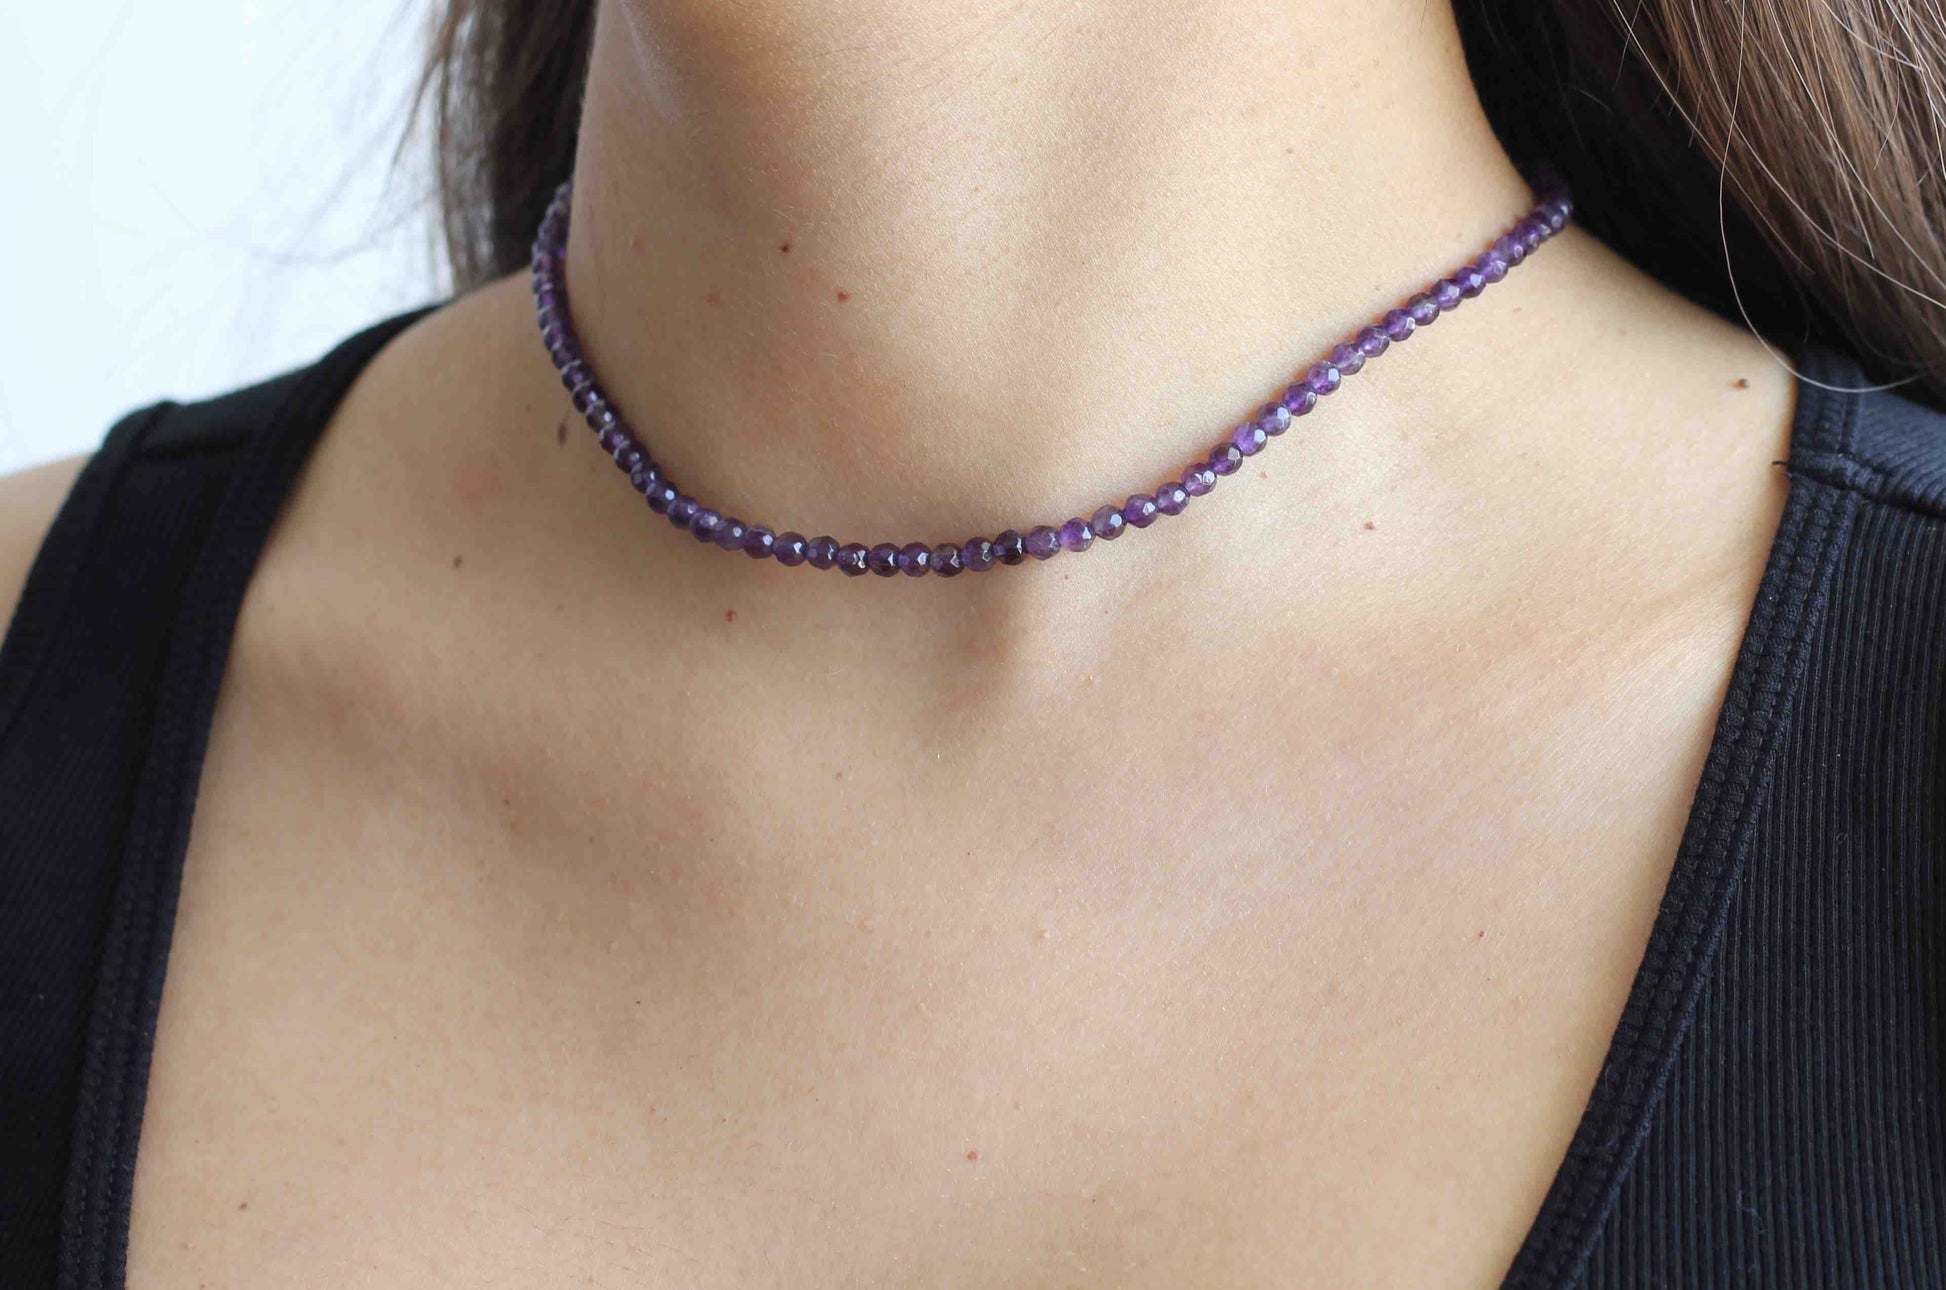 Handmade Minimal Choker Amethyst Necklace with 925 Sterling Silver Closure